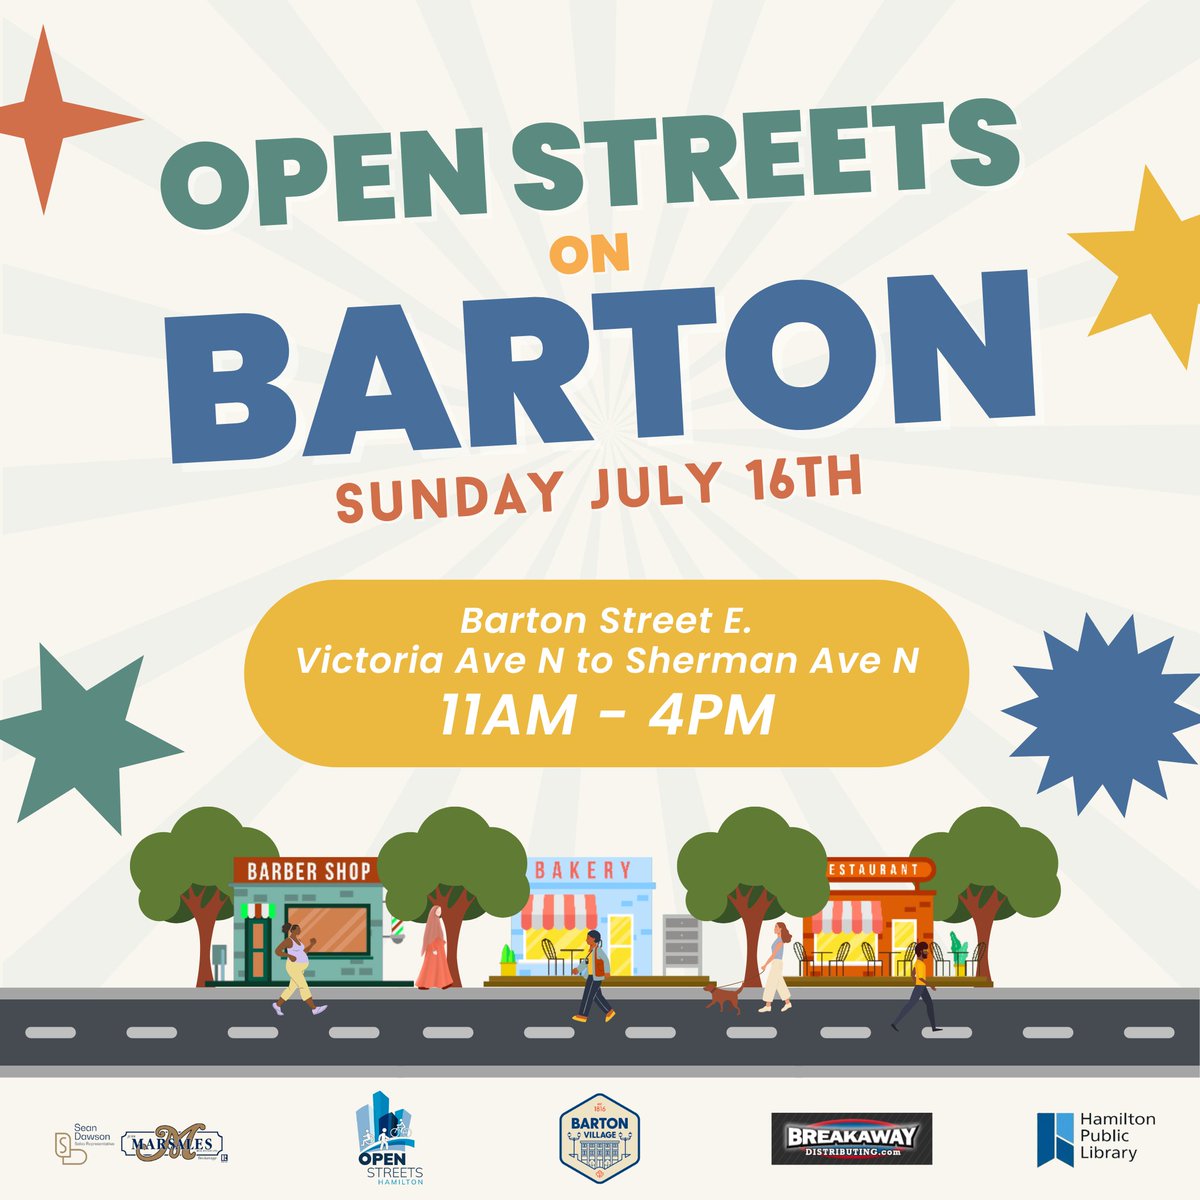 ACORN Hamilton will be a vendor at the Open Streets event in Barton Village on Sunday July 16th. Come by and say hi! #OpenStreets #HamOnt #BartonVillage